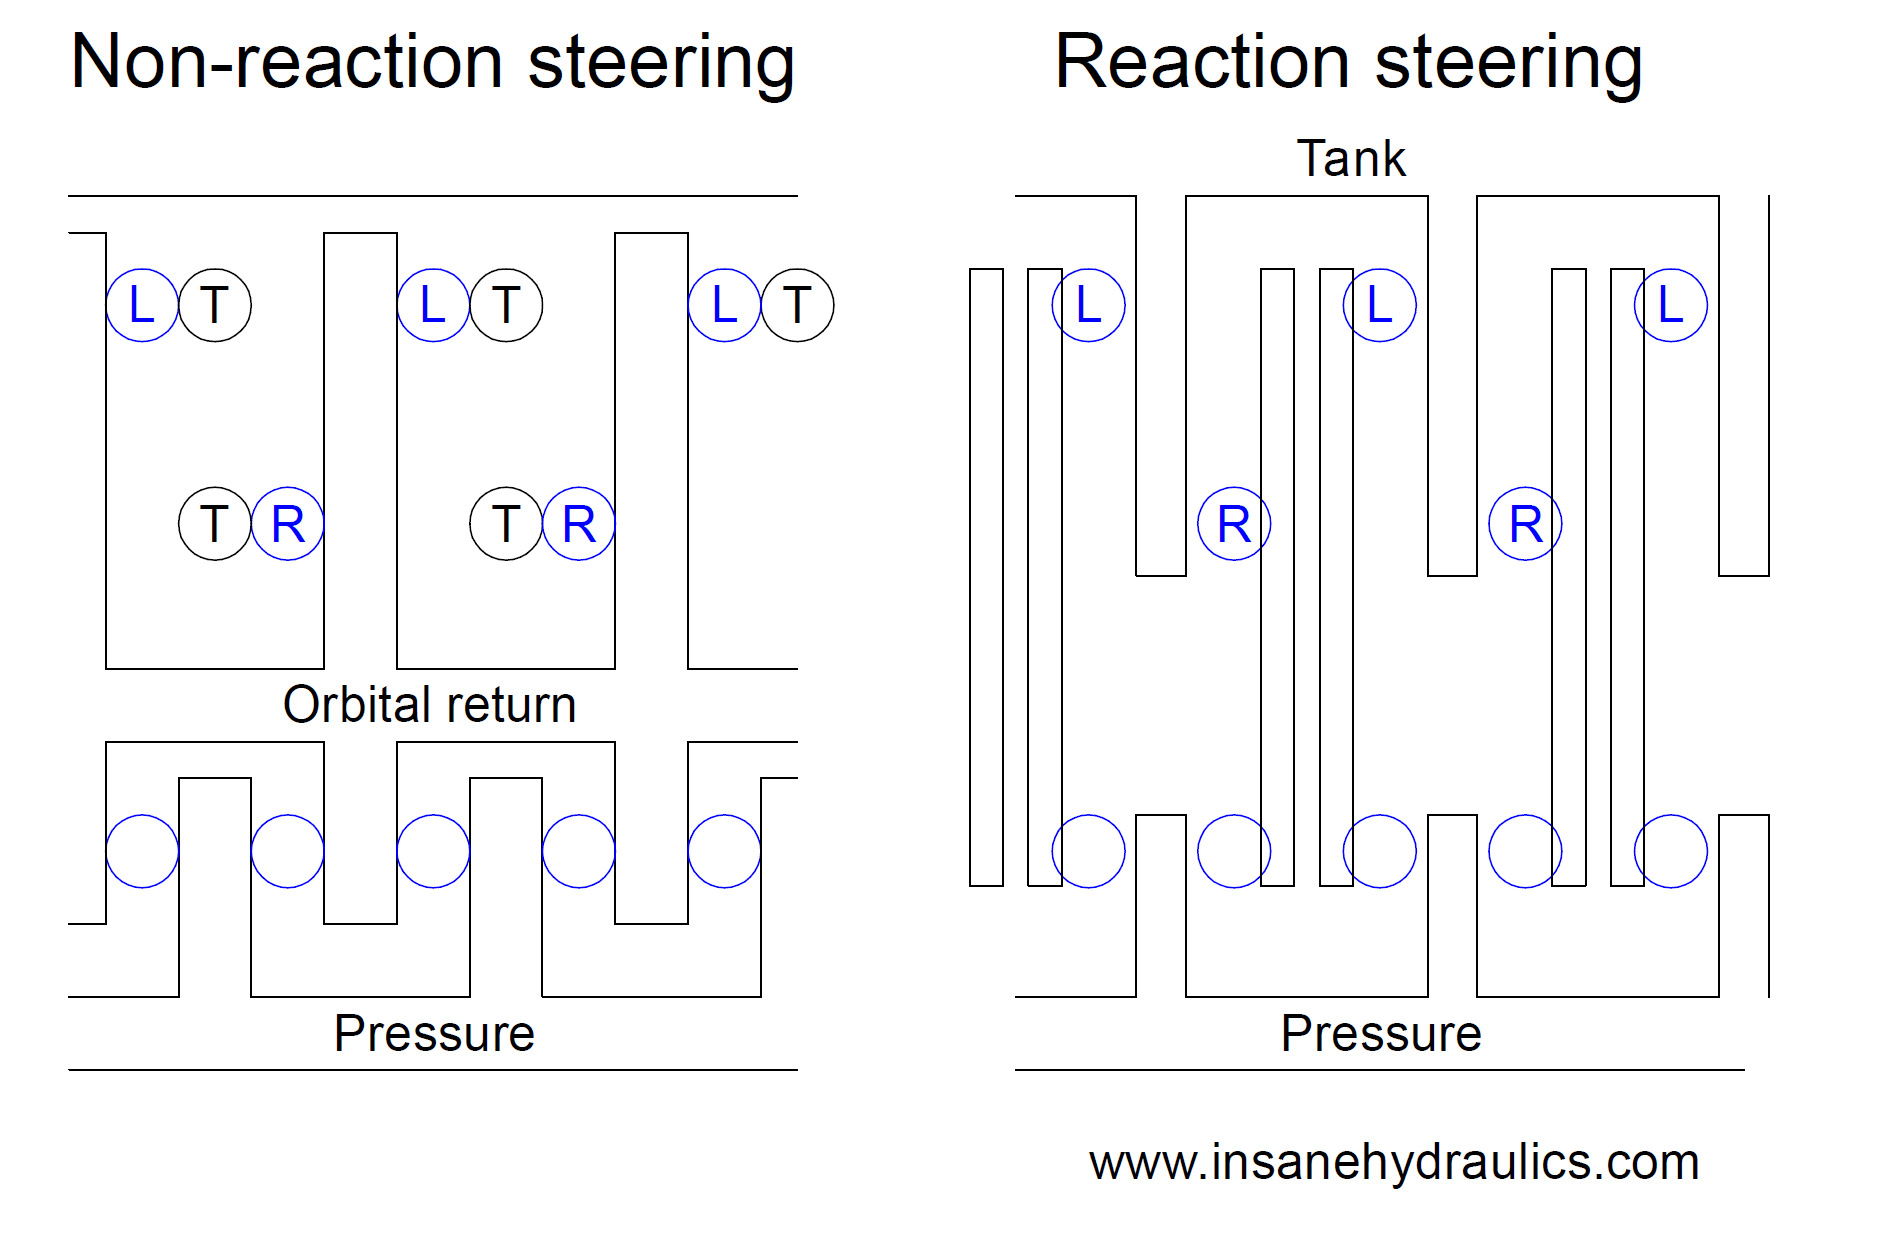 Schematic of spool valve design of reaction and non-reactoin steering valves